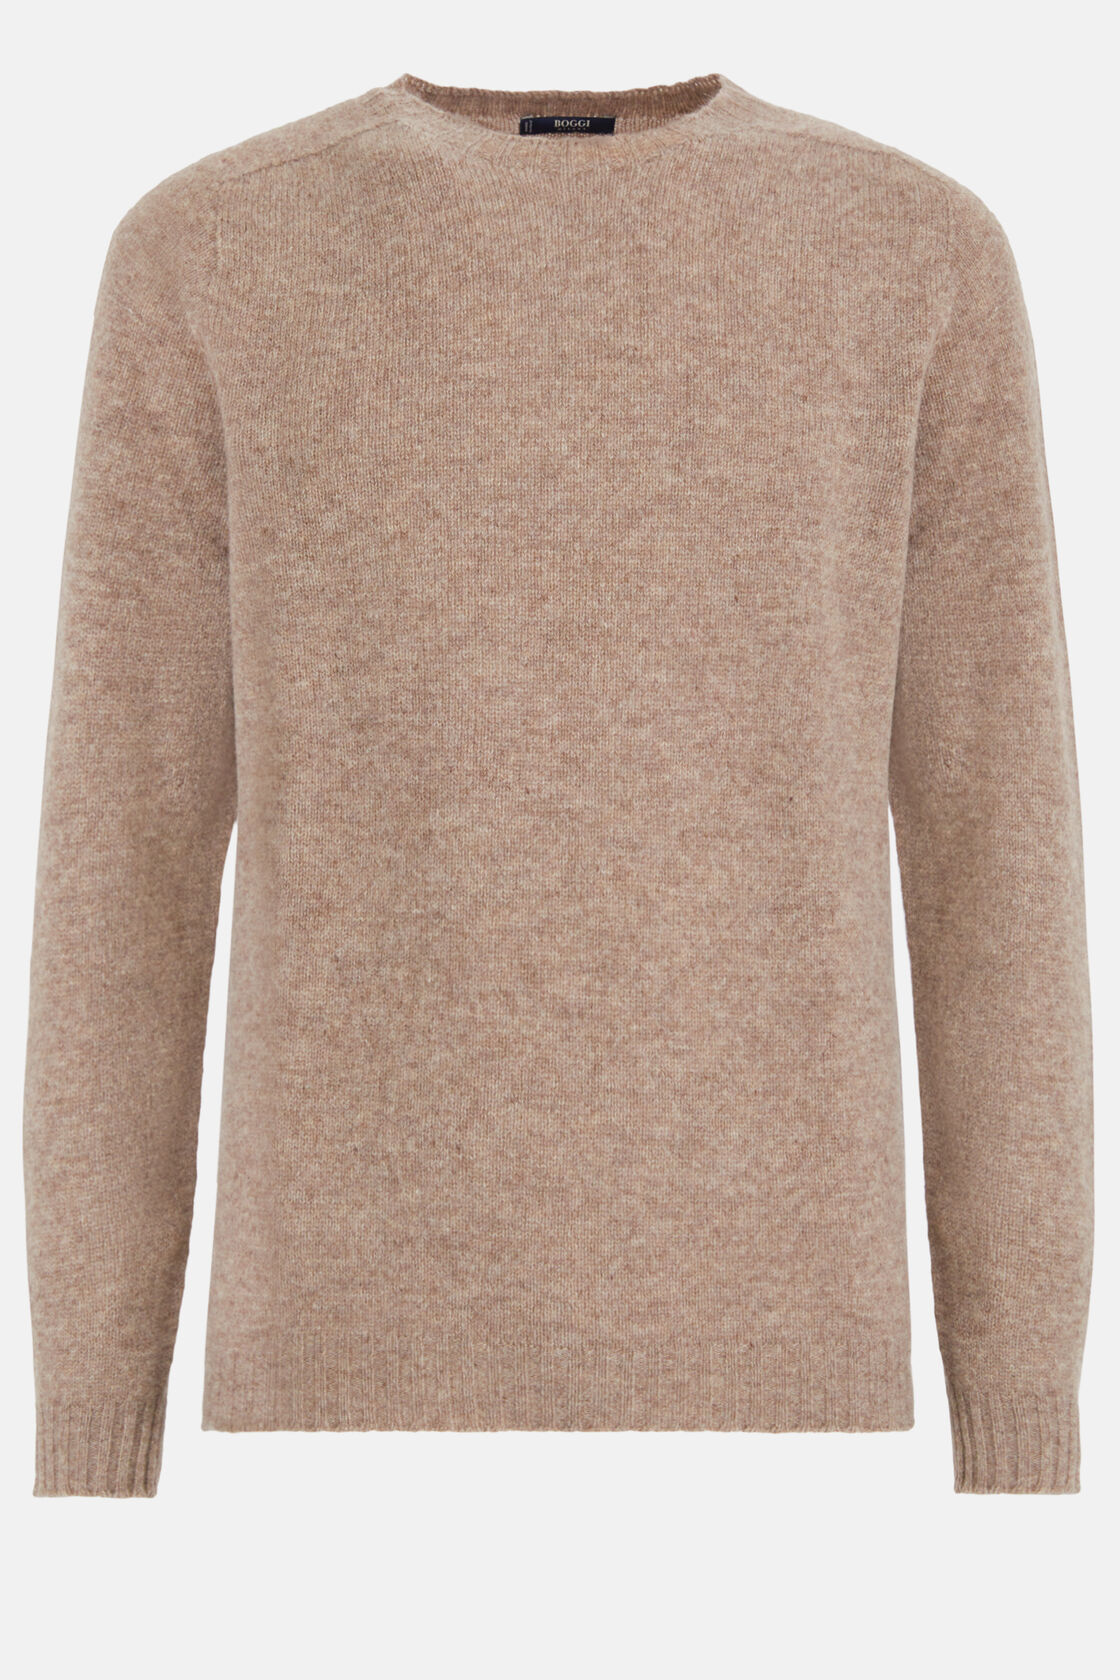 Dove Grey Merino Wool Polo Neck Jumper, Taupe, hi-res